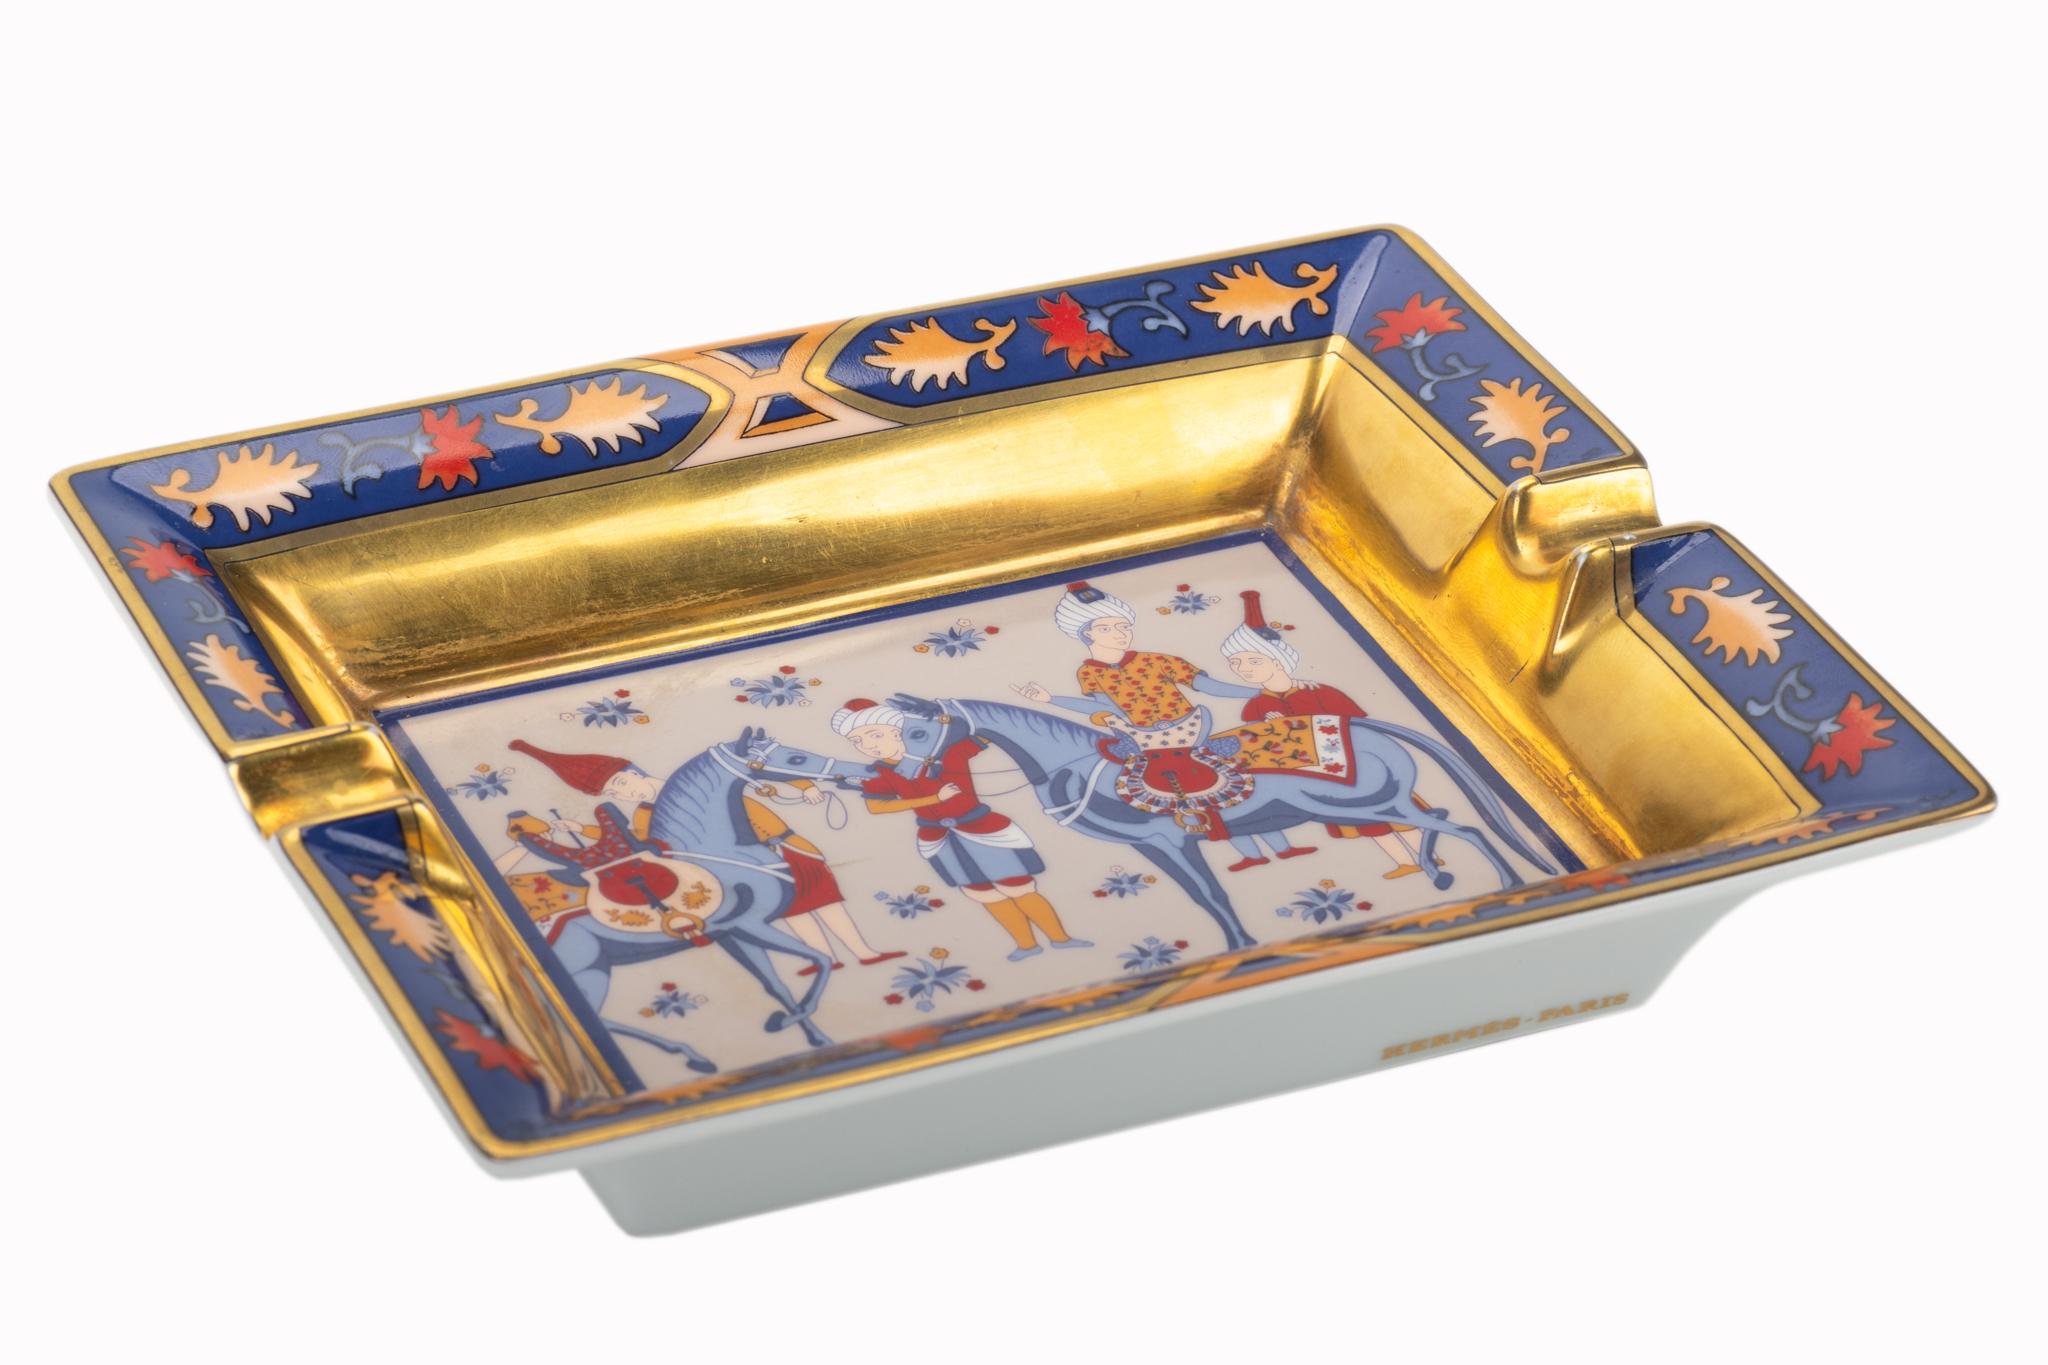 Hermes rare and collectible ashtray with Indian design in blue, red and gold. Suede stamped bottom. Made in France.
